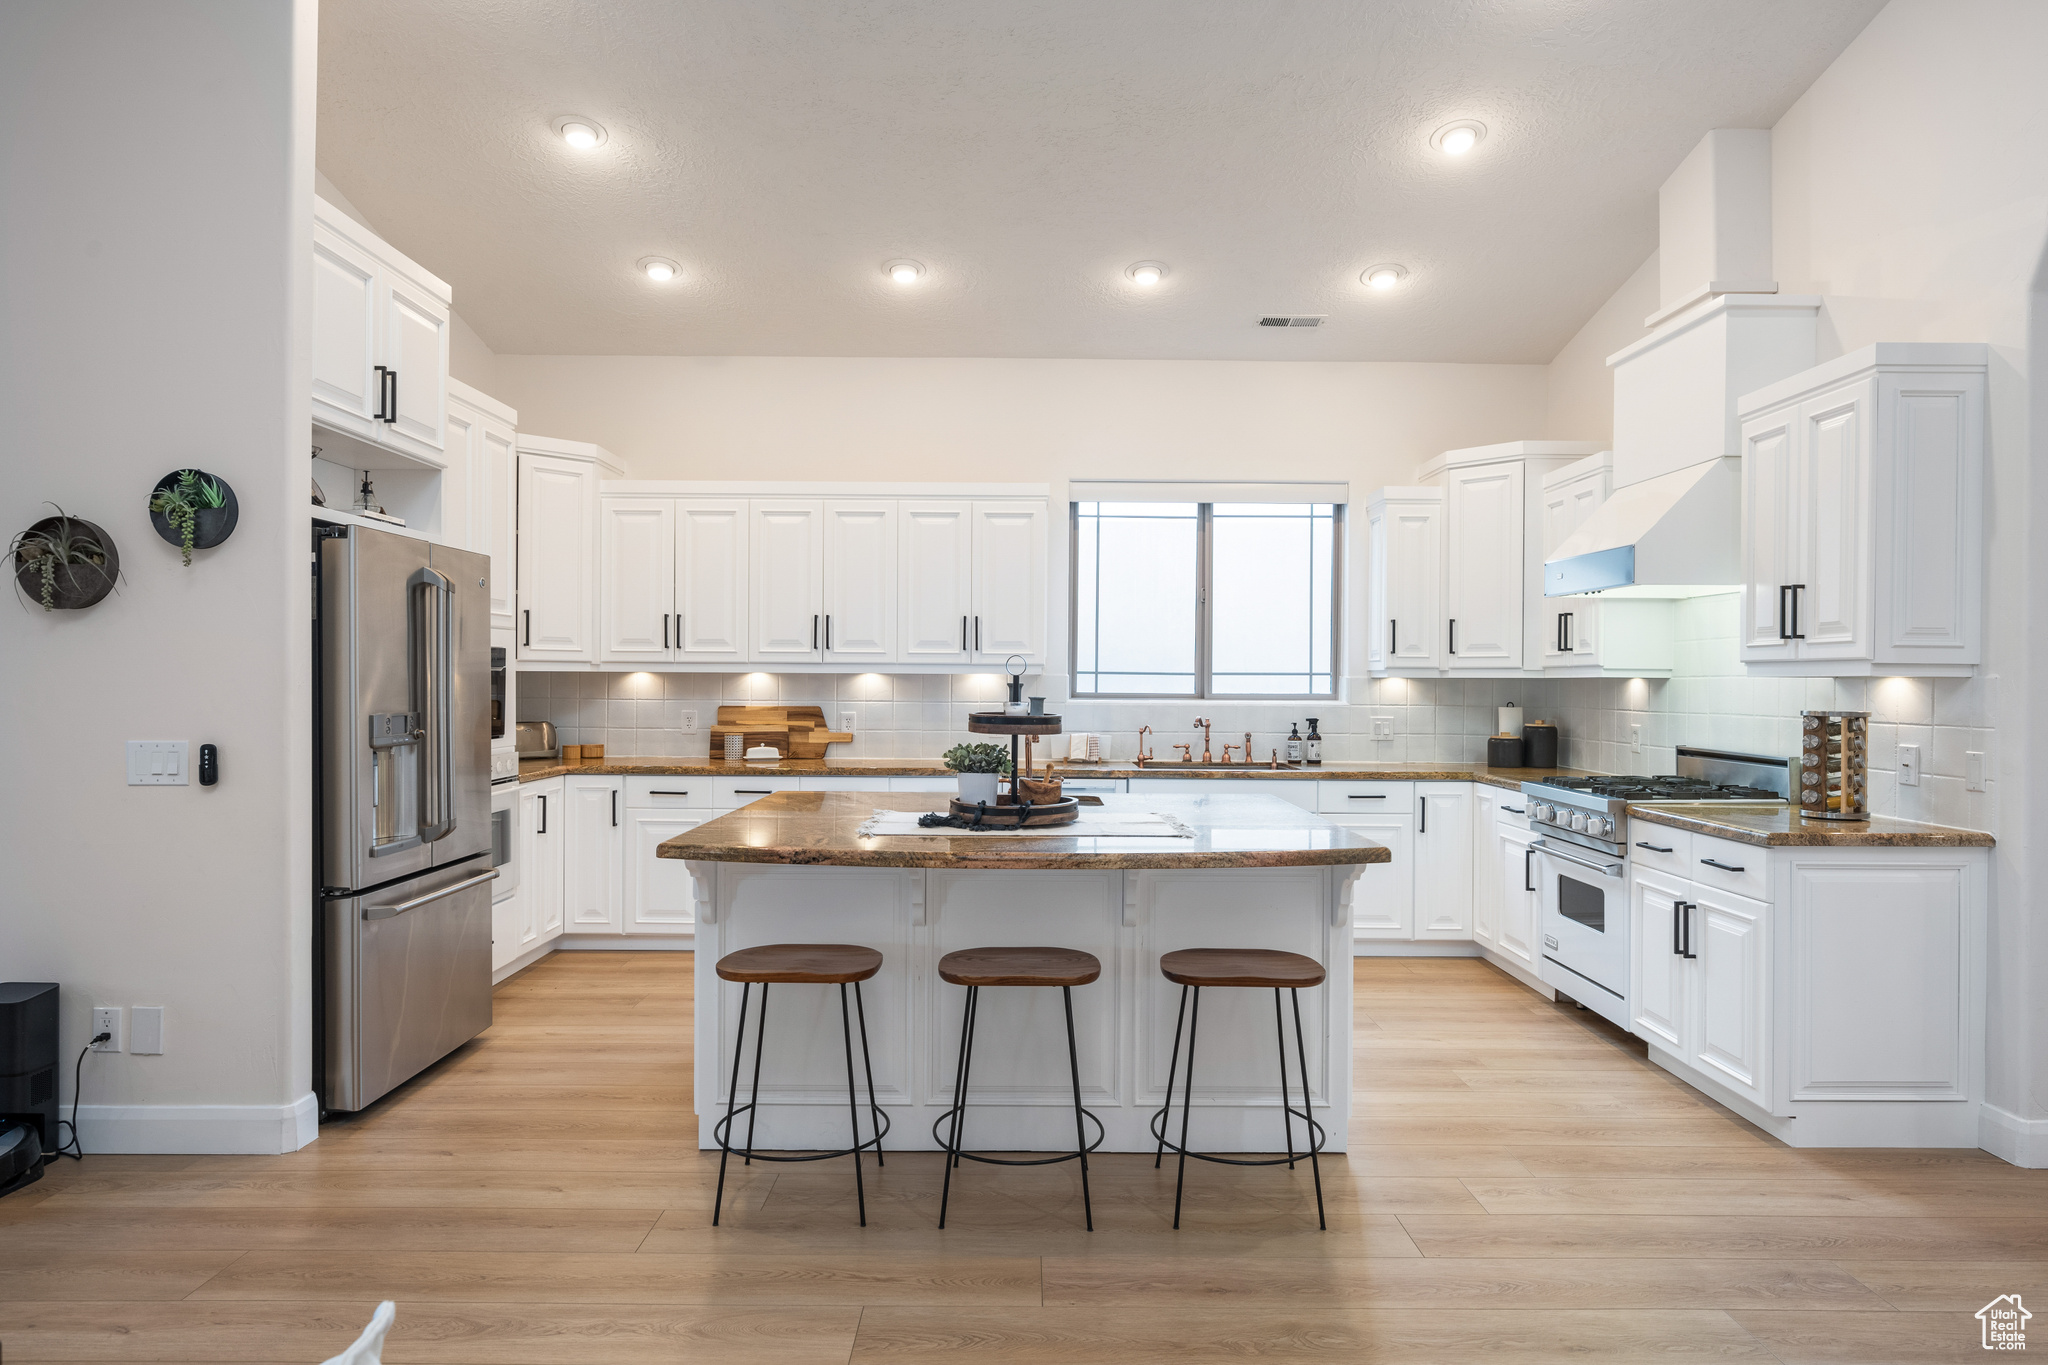 Kitchen with white cabinetry, a kitchen island, a breakfast bar area, backsplash, and high quality appliances